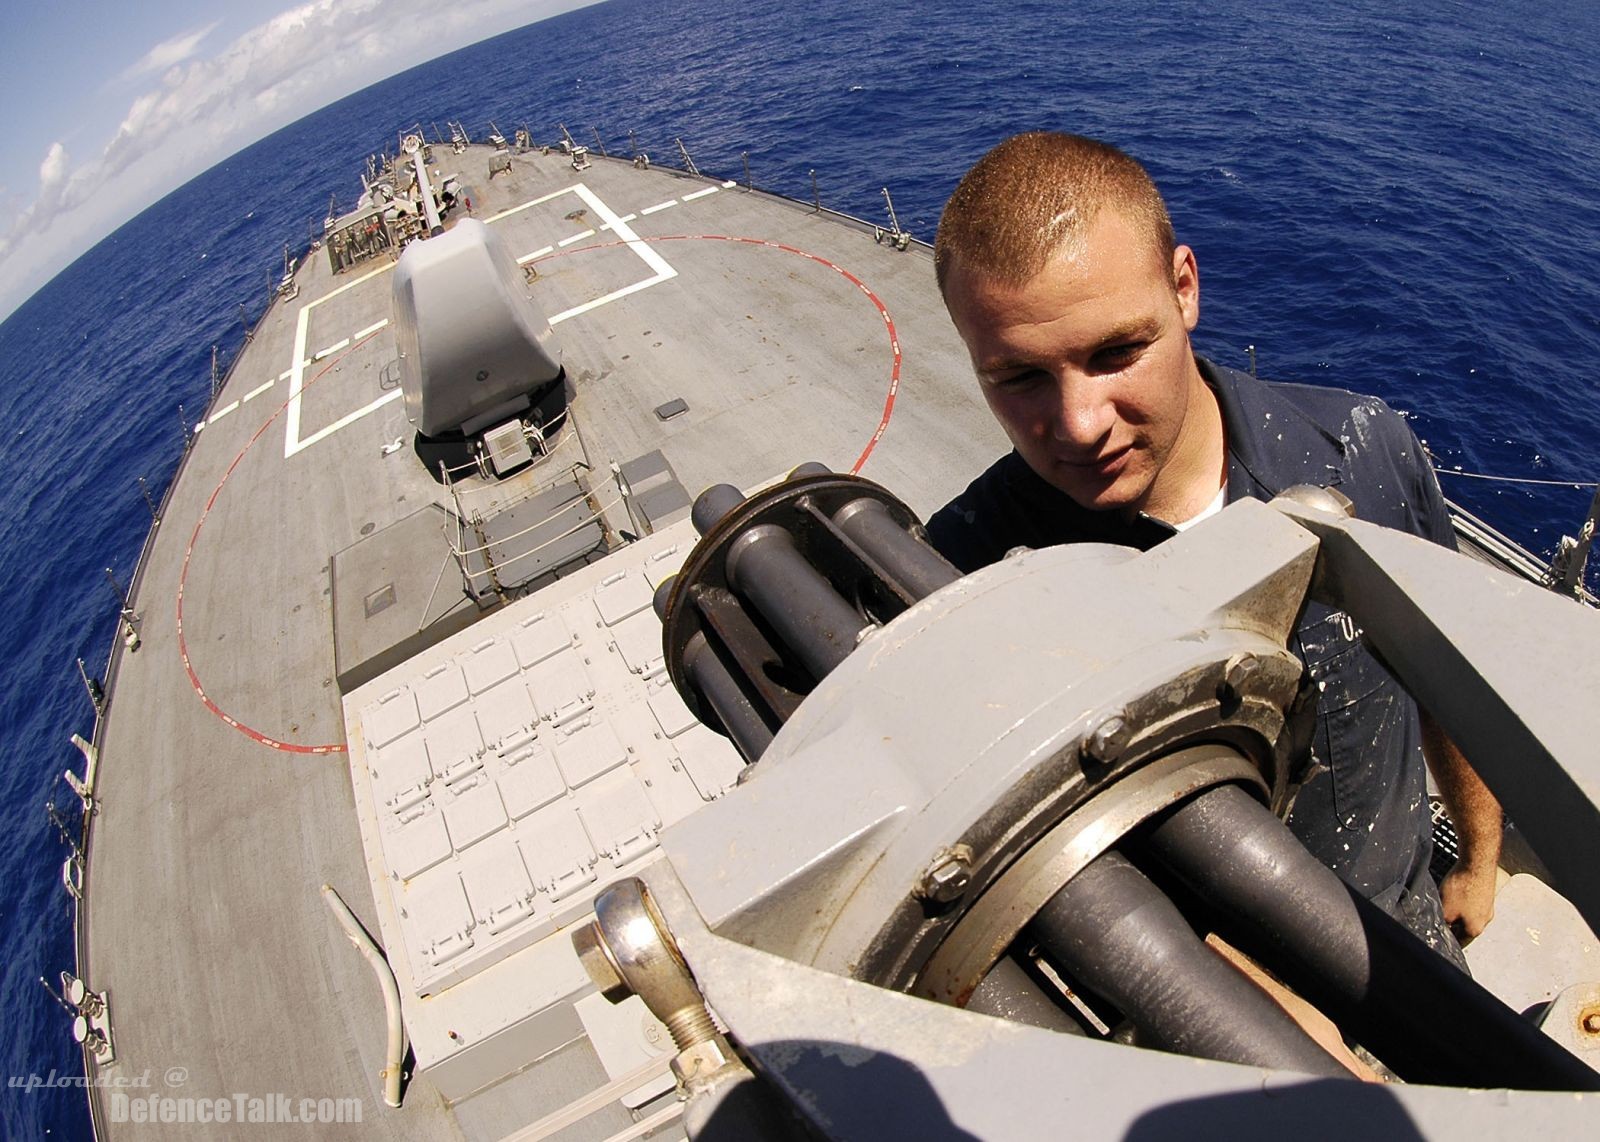 Close In Weapons System (CIWS) - Valiant Shield 2006.